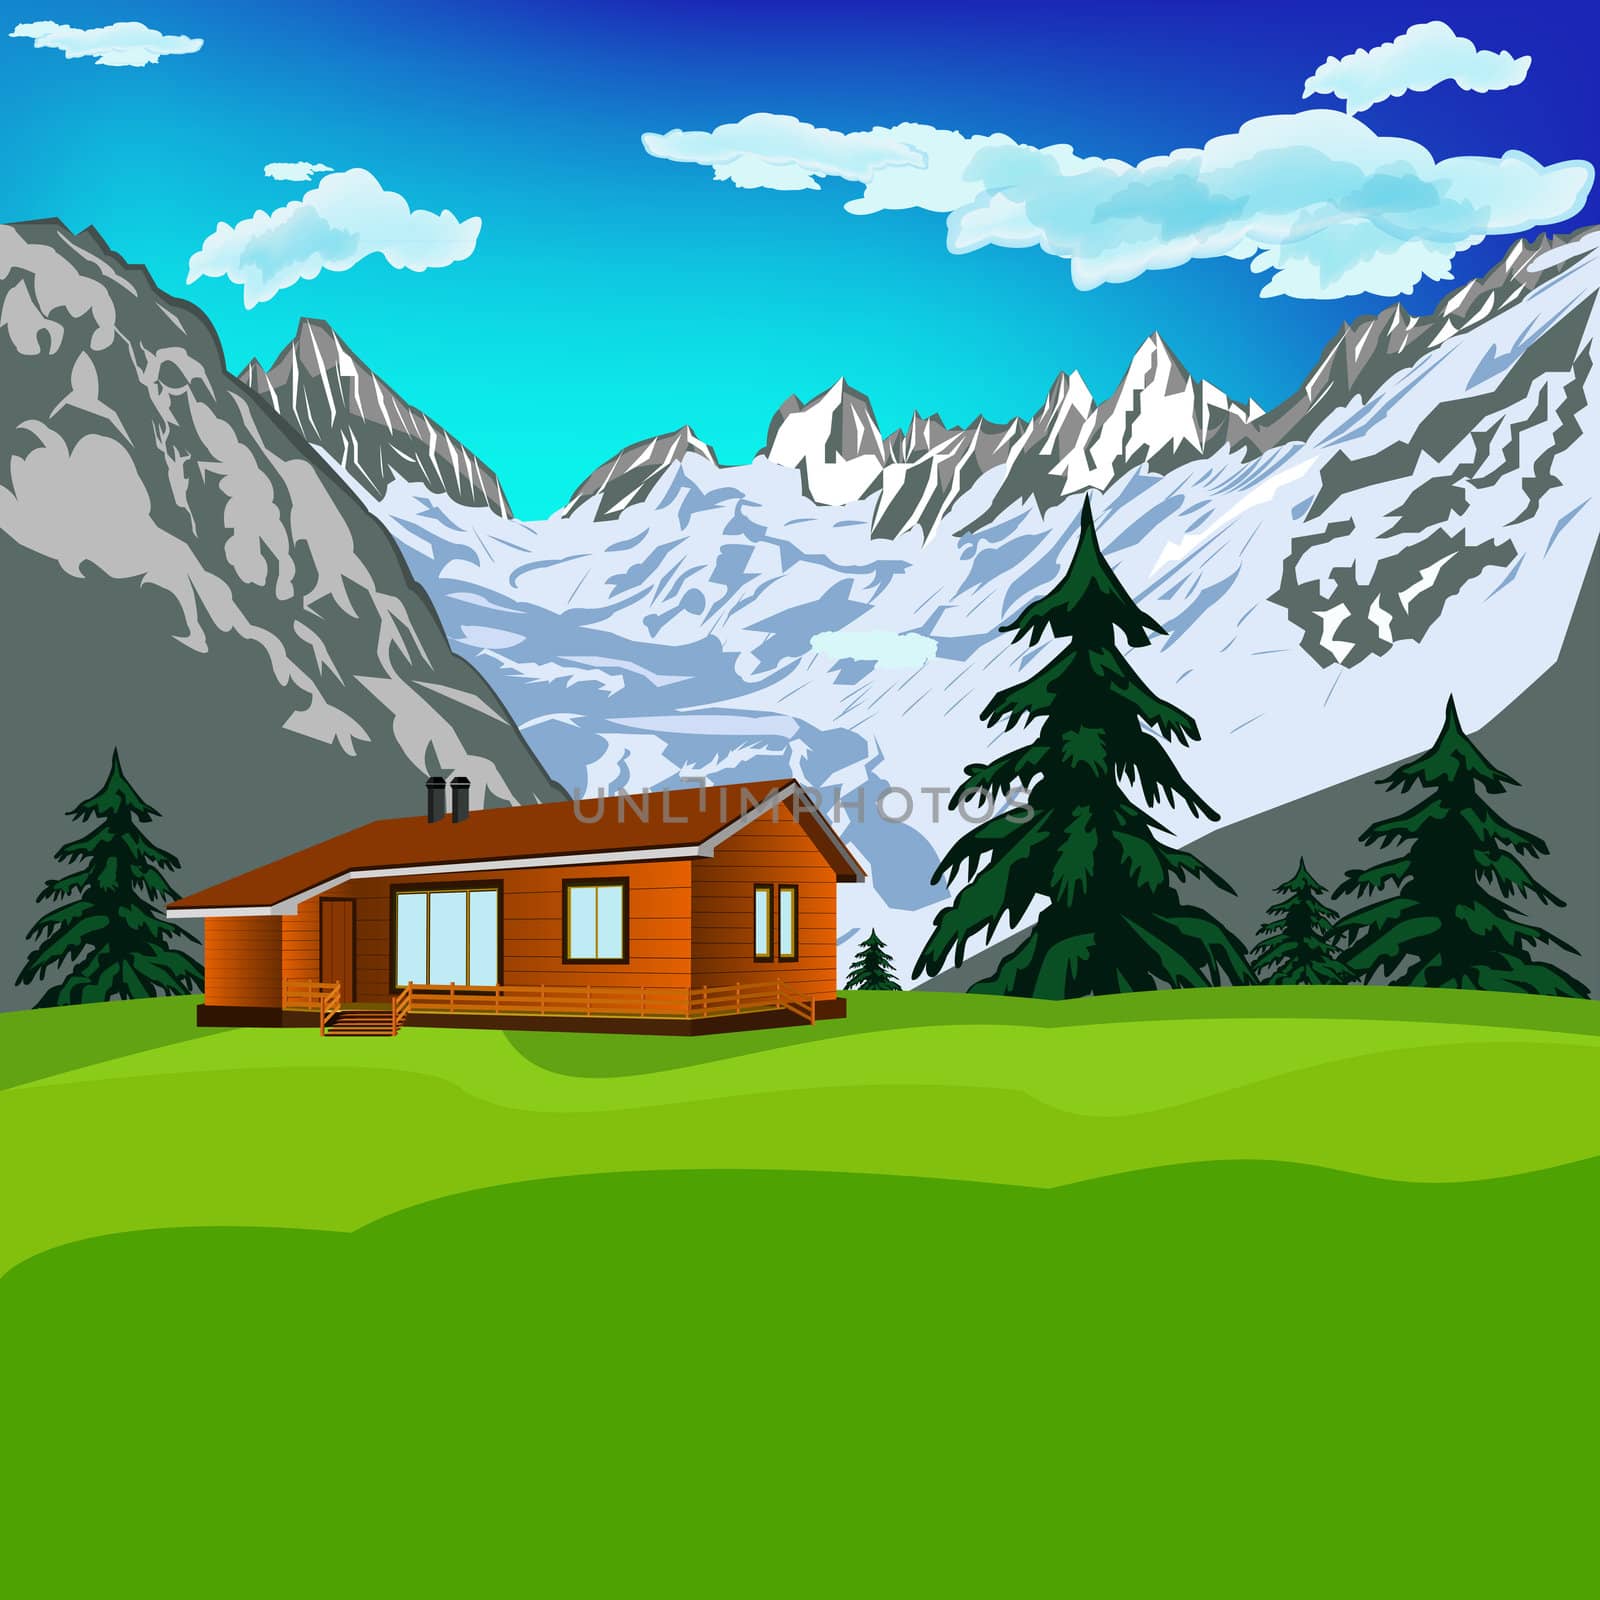 Best alps mountains resort with clean air Mountains landscape by sergey150770SV